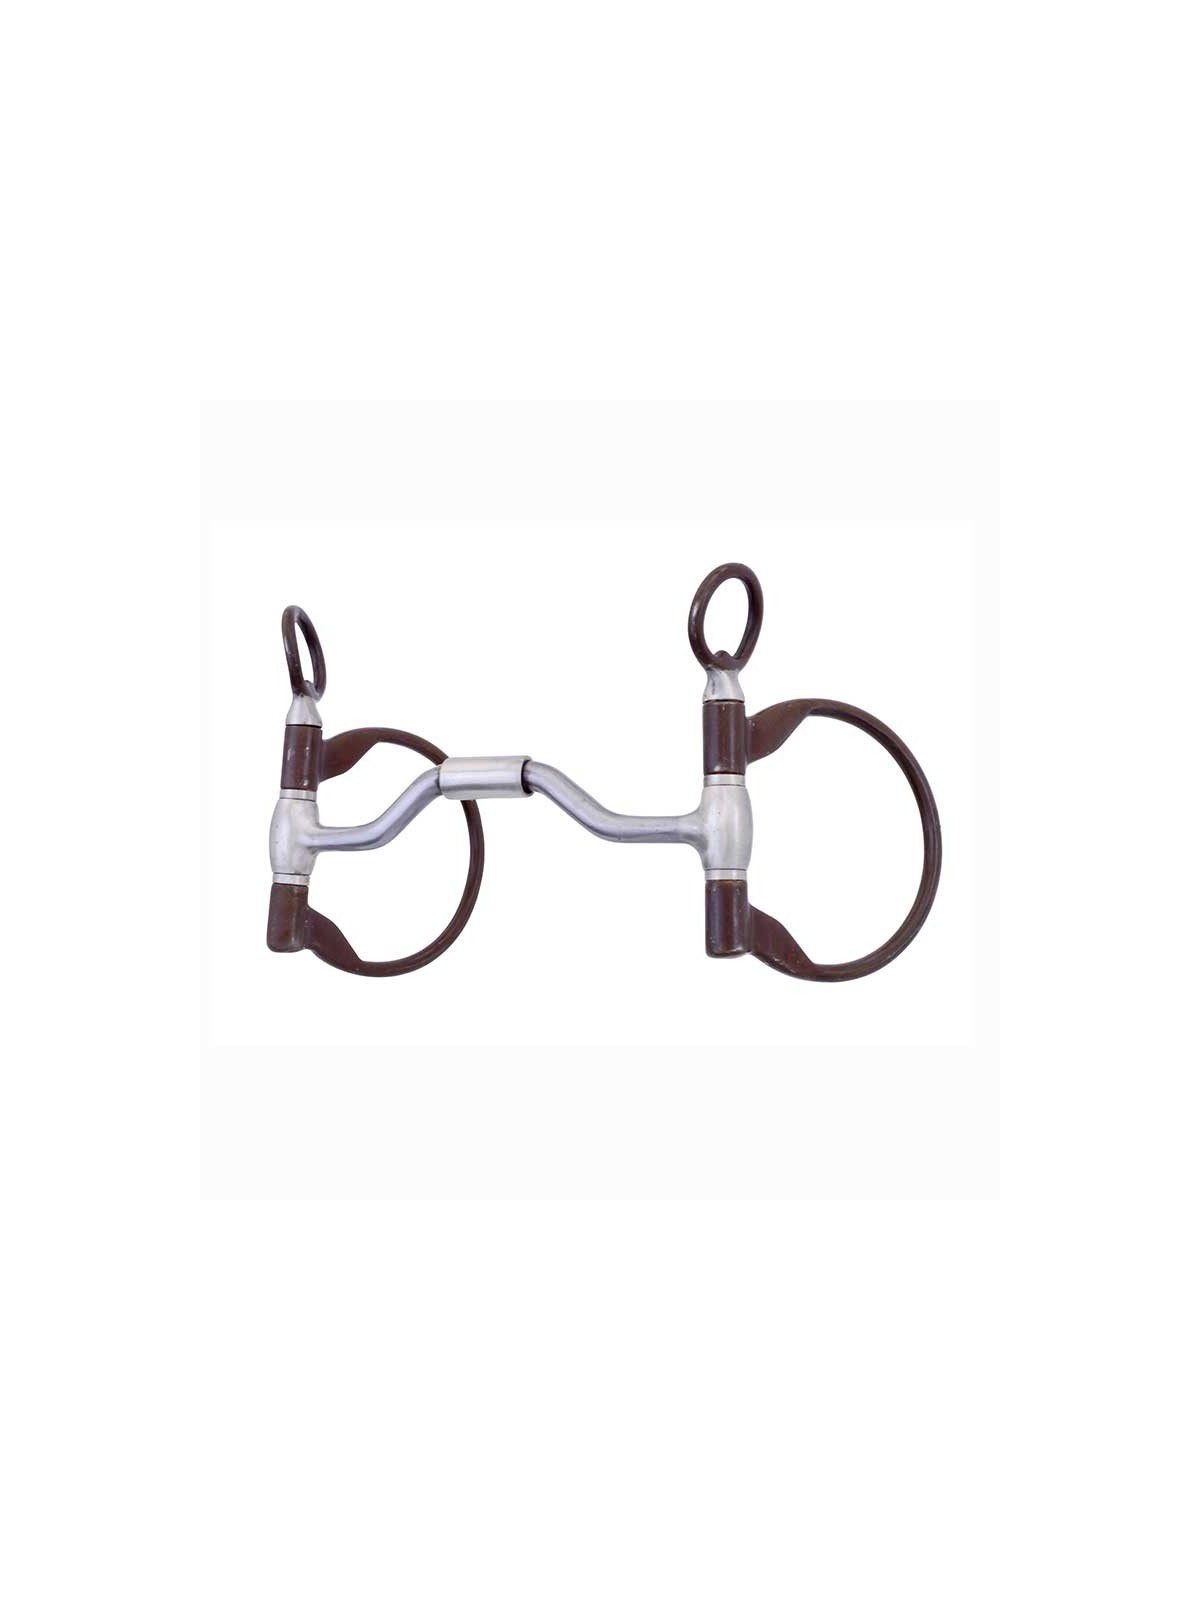 FG Clinician Ported Hinged D-Ring Snaffle Bit